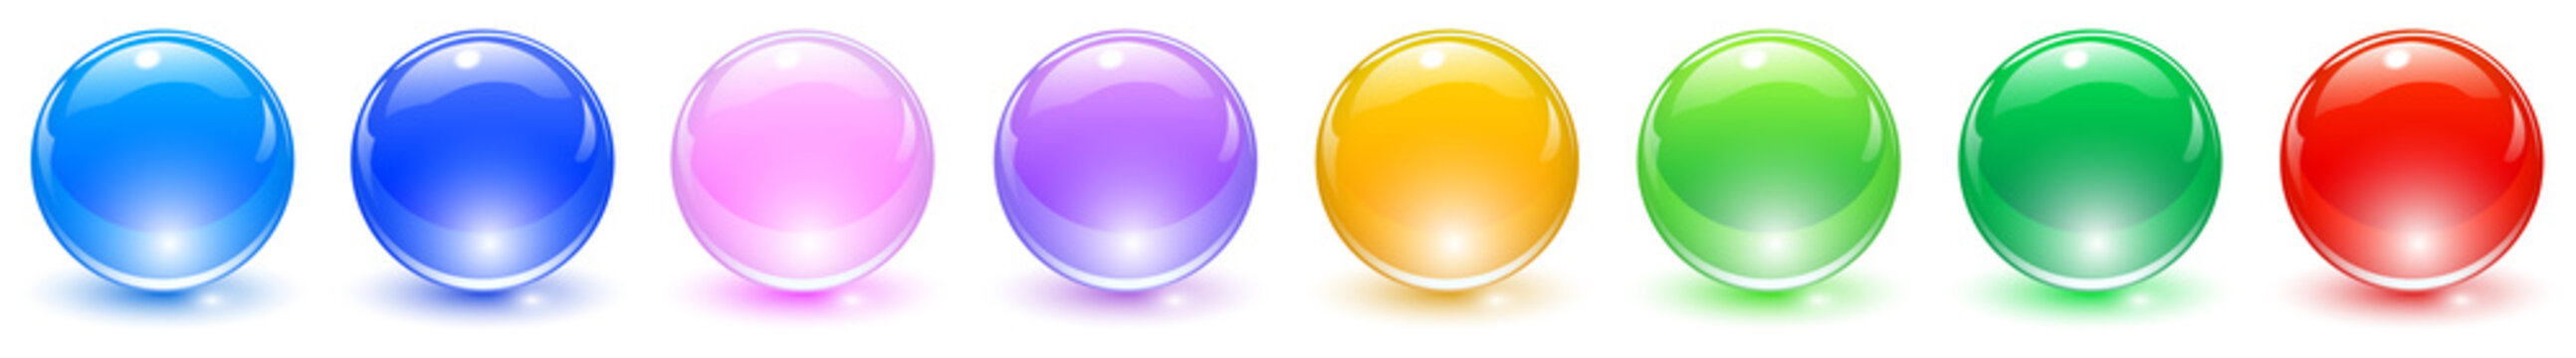 Set of colored spheres, shiny and glossy 3D colorful glass balls collection, multicolored vector illustration.